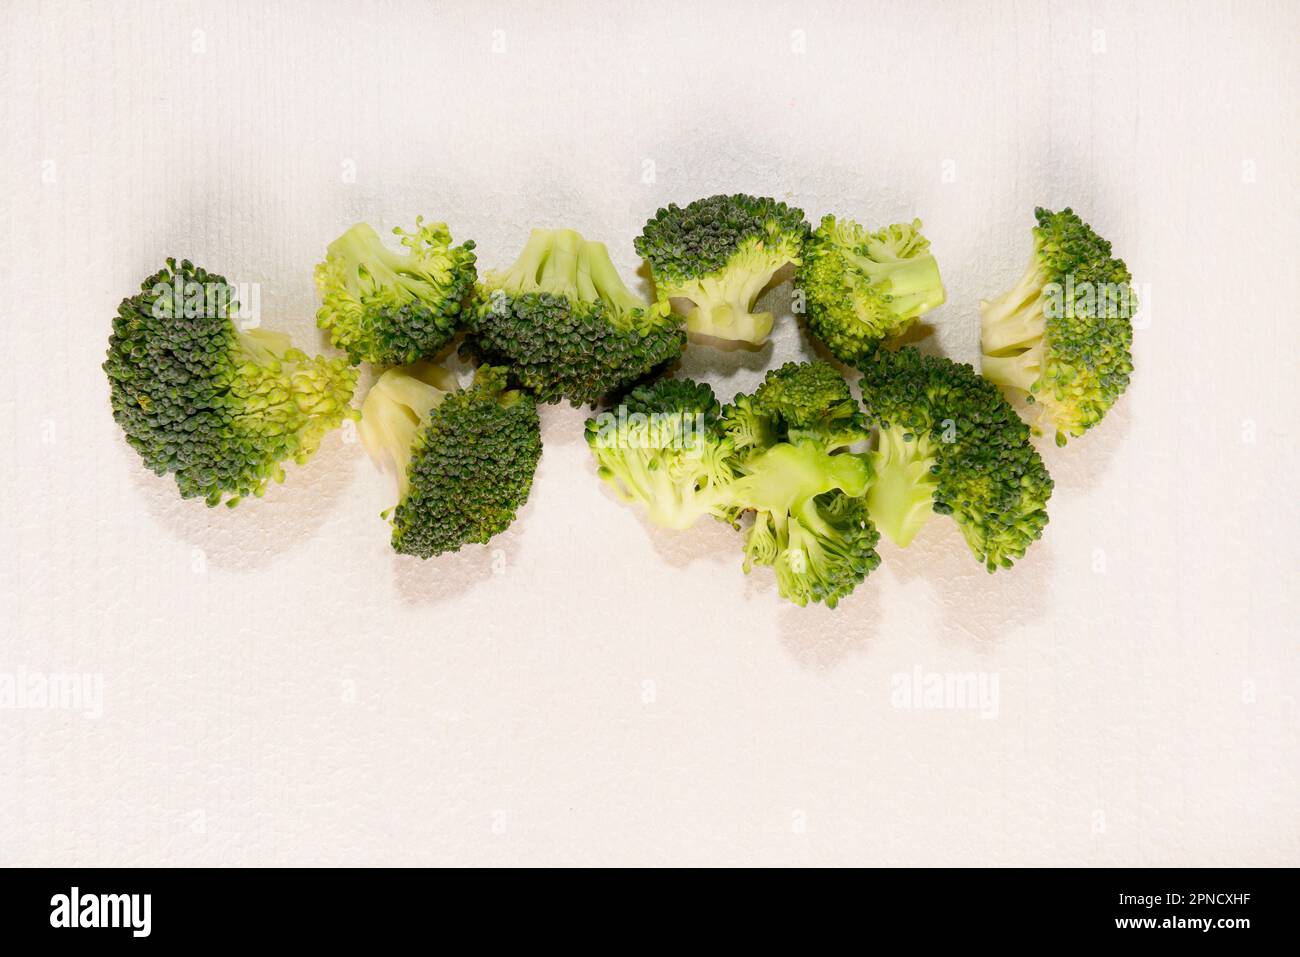 broccoli, variety of cabbage with ball-shaped inflorescence, dark green in color Stock Photo